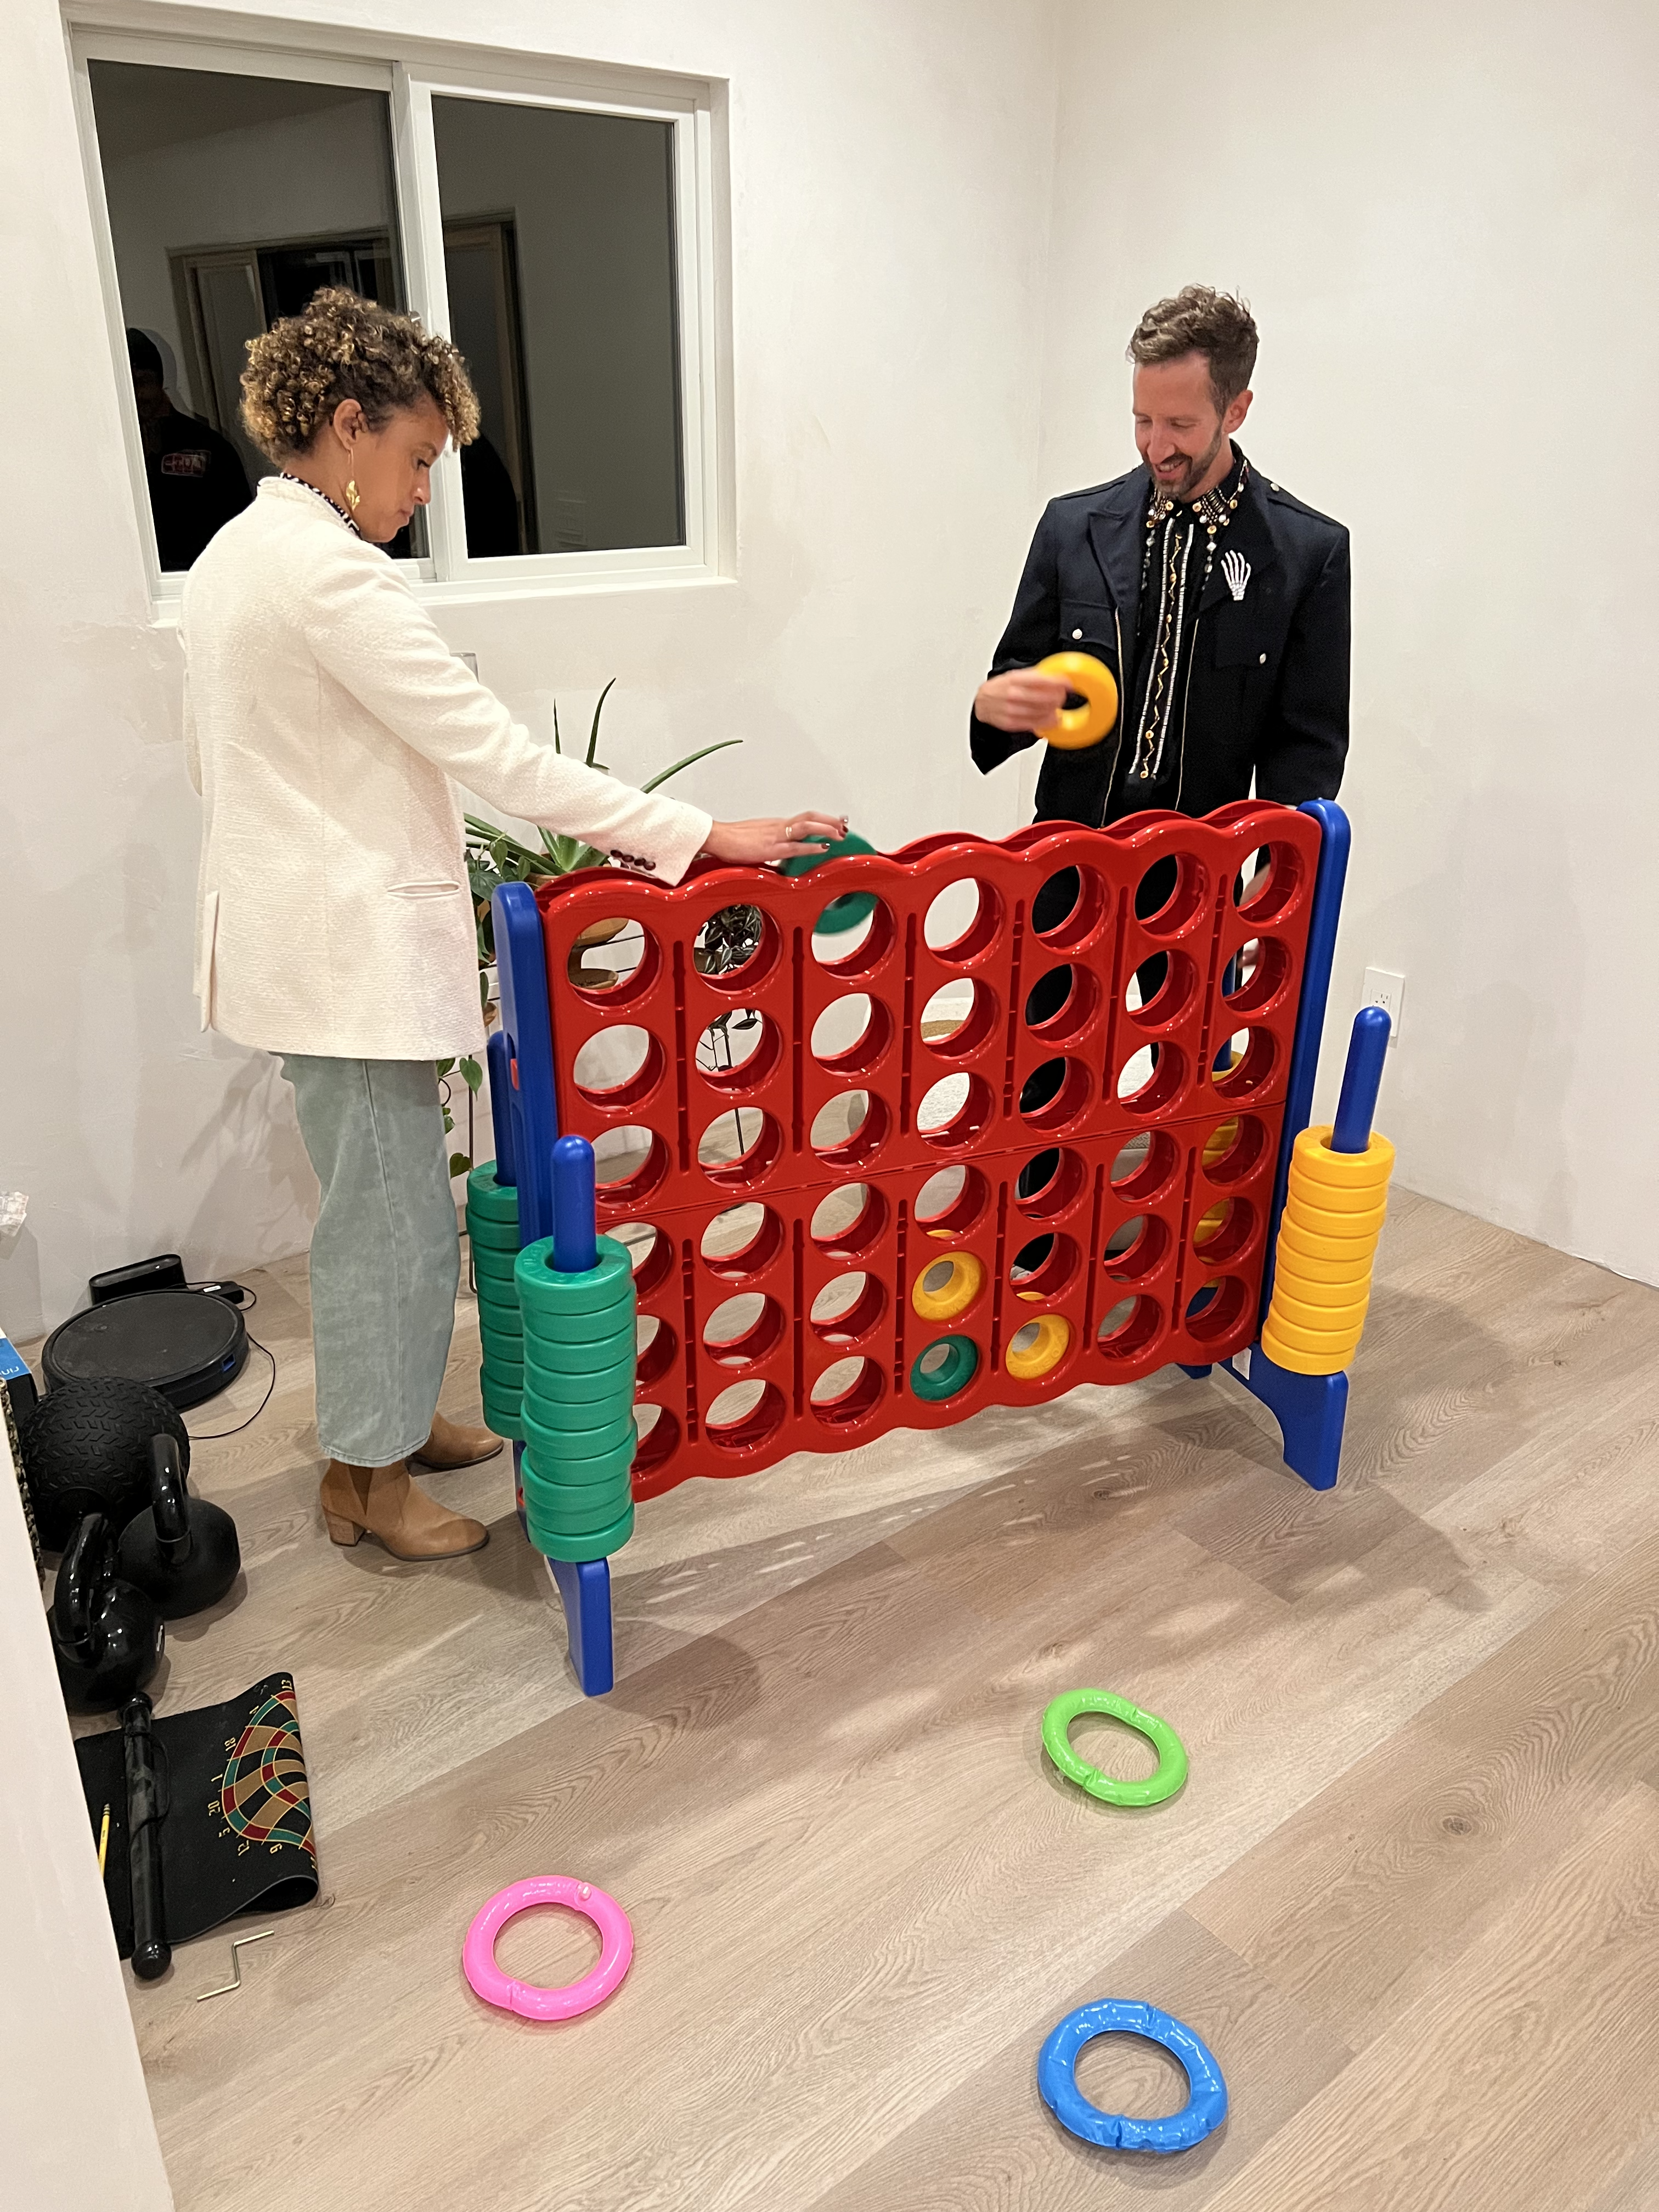 15% off & GIANT CONNECT 4 at Yoso the Annex